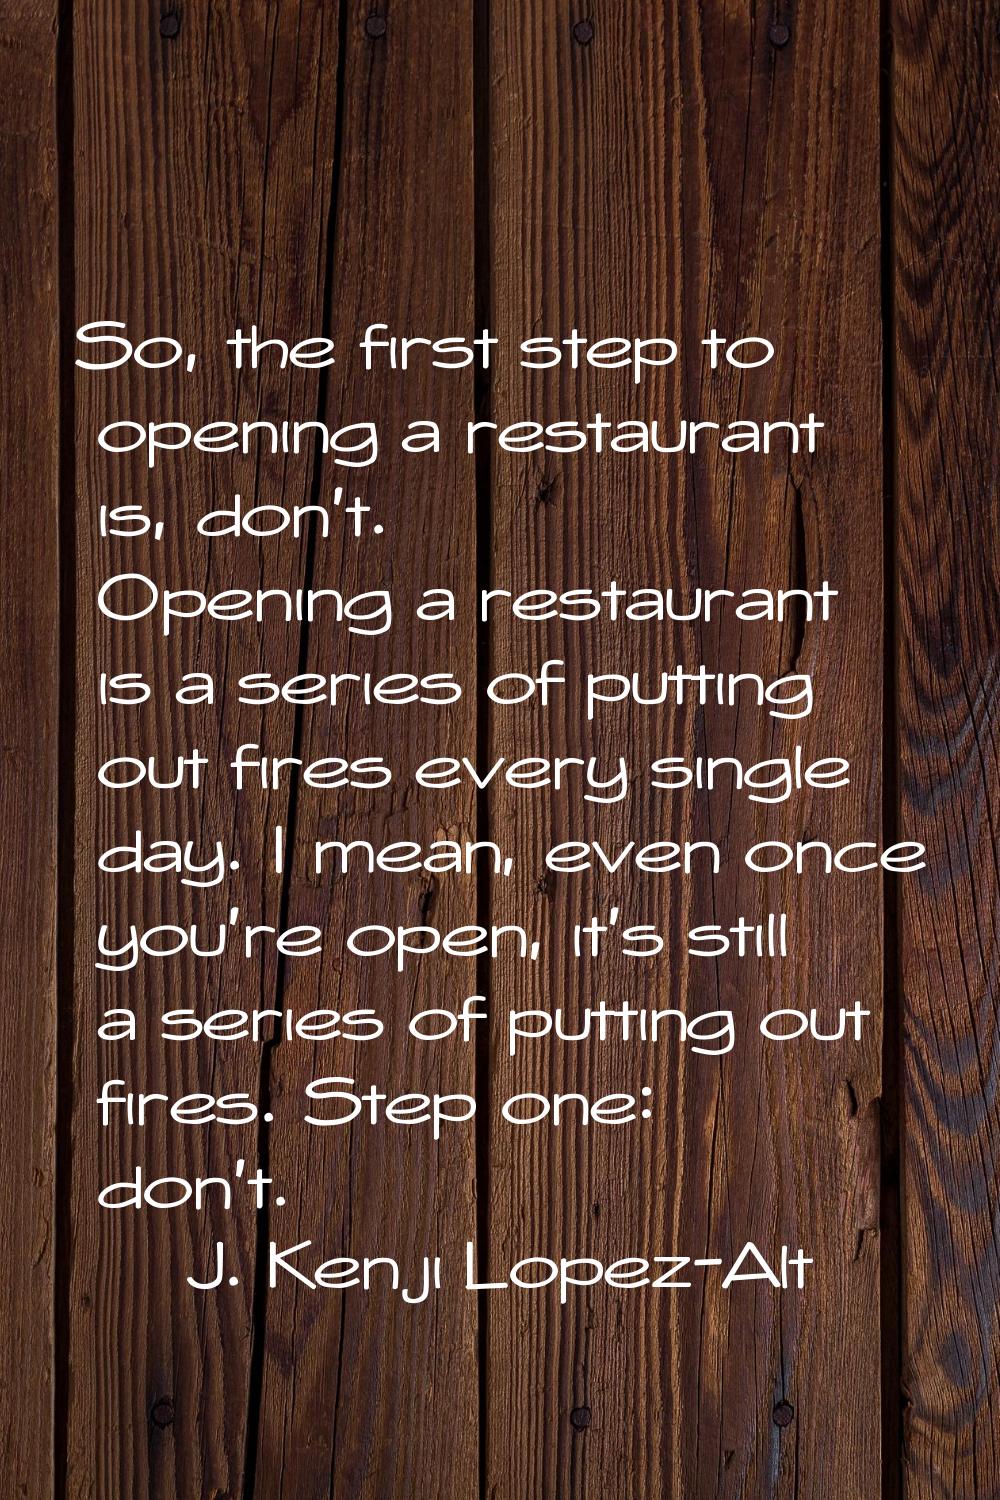 So, the first step to opening a restaurant is, don't. Opening a restaurant is a series of putting o